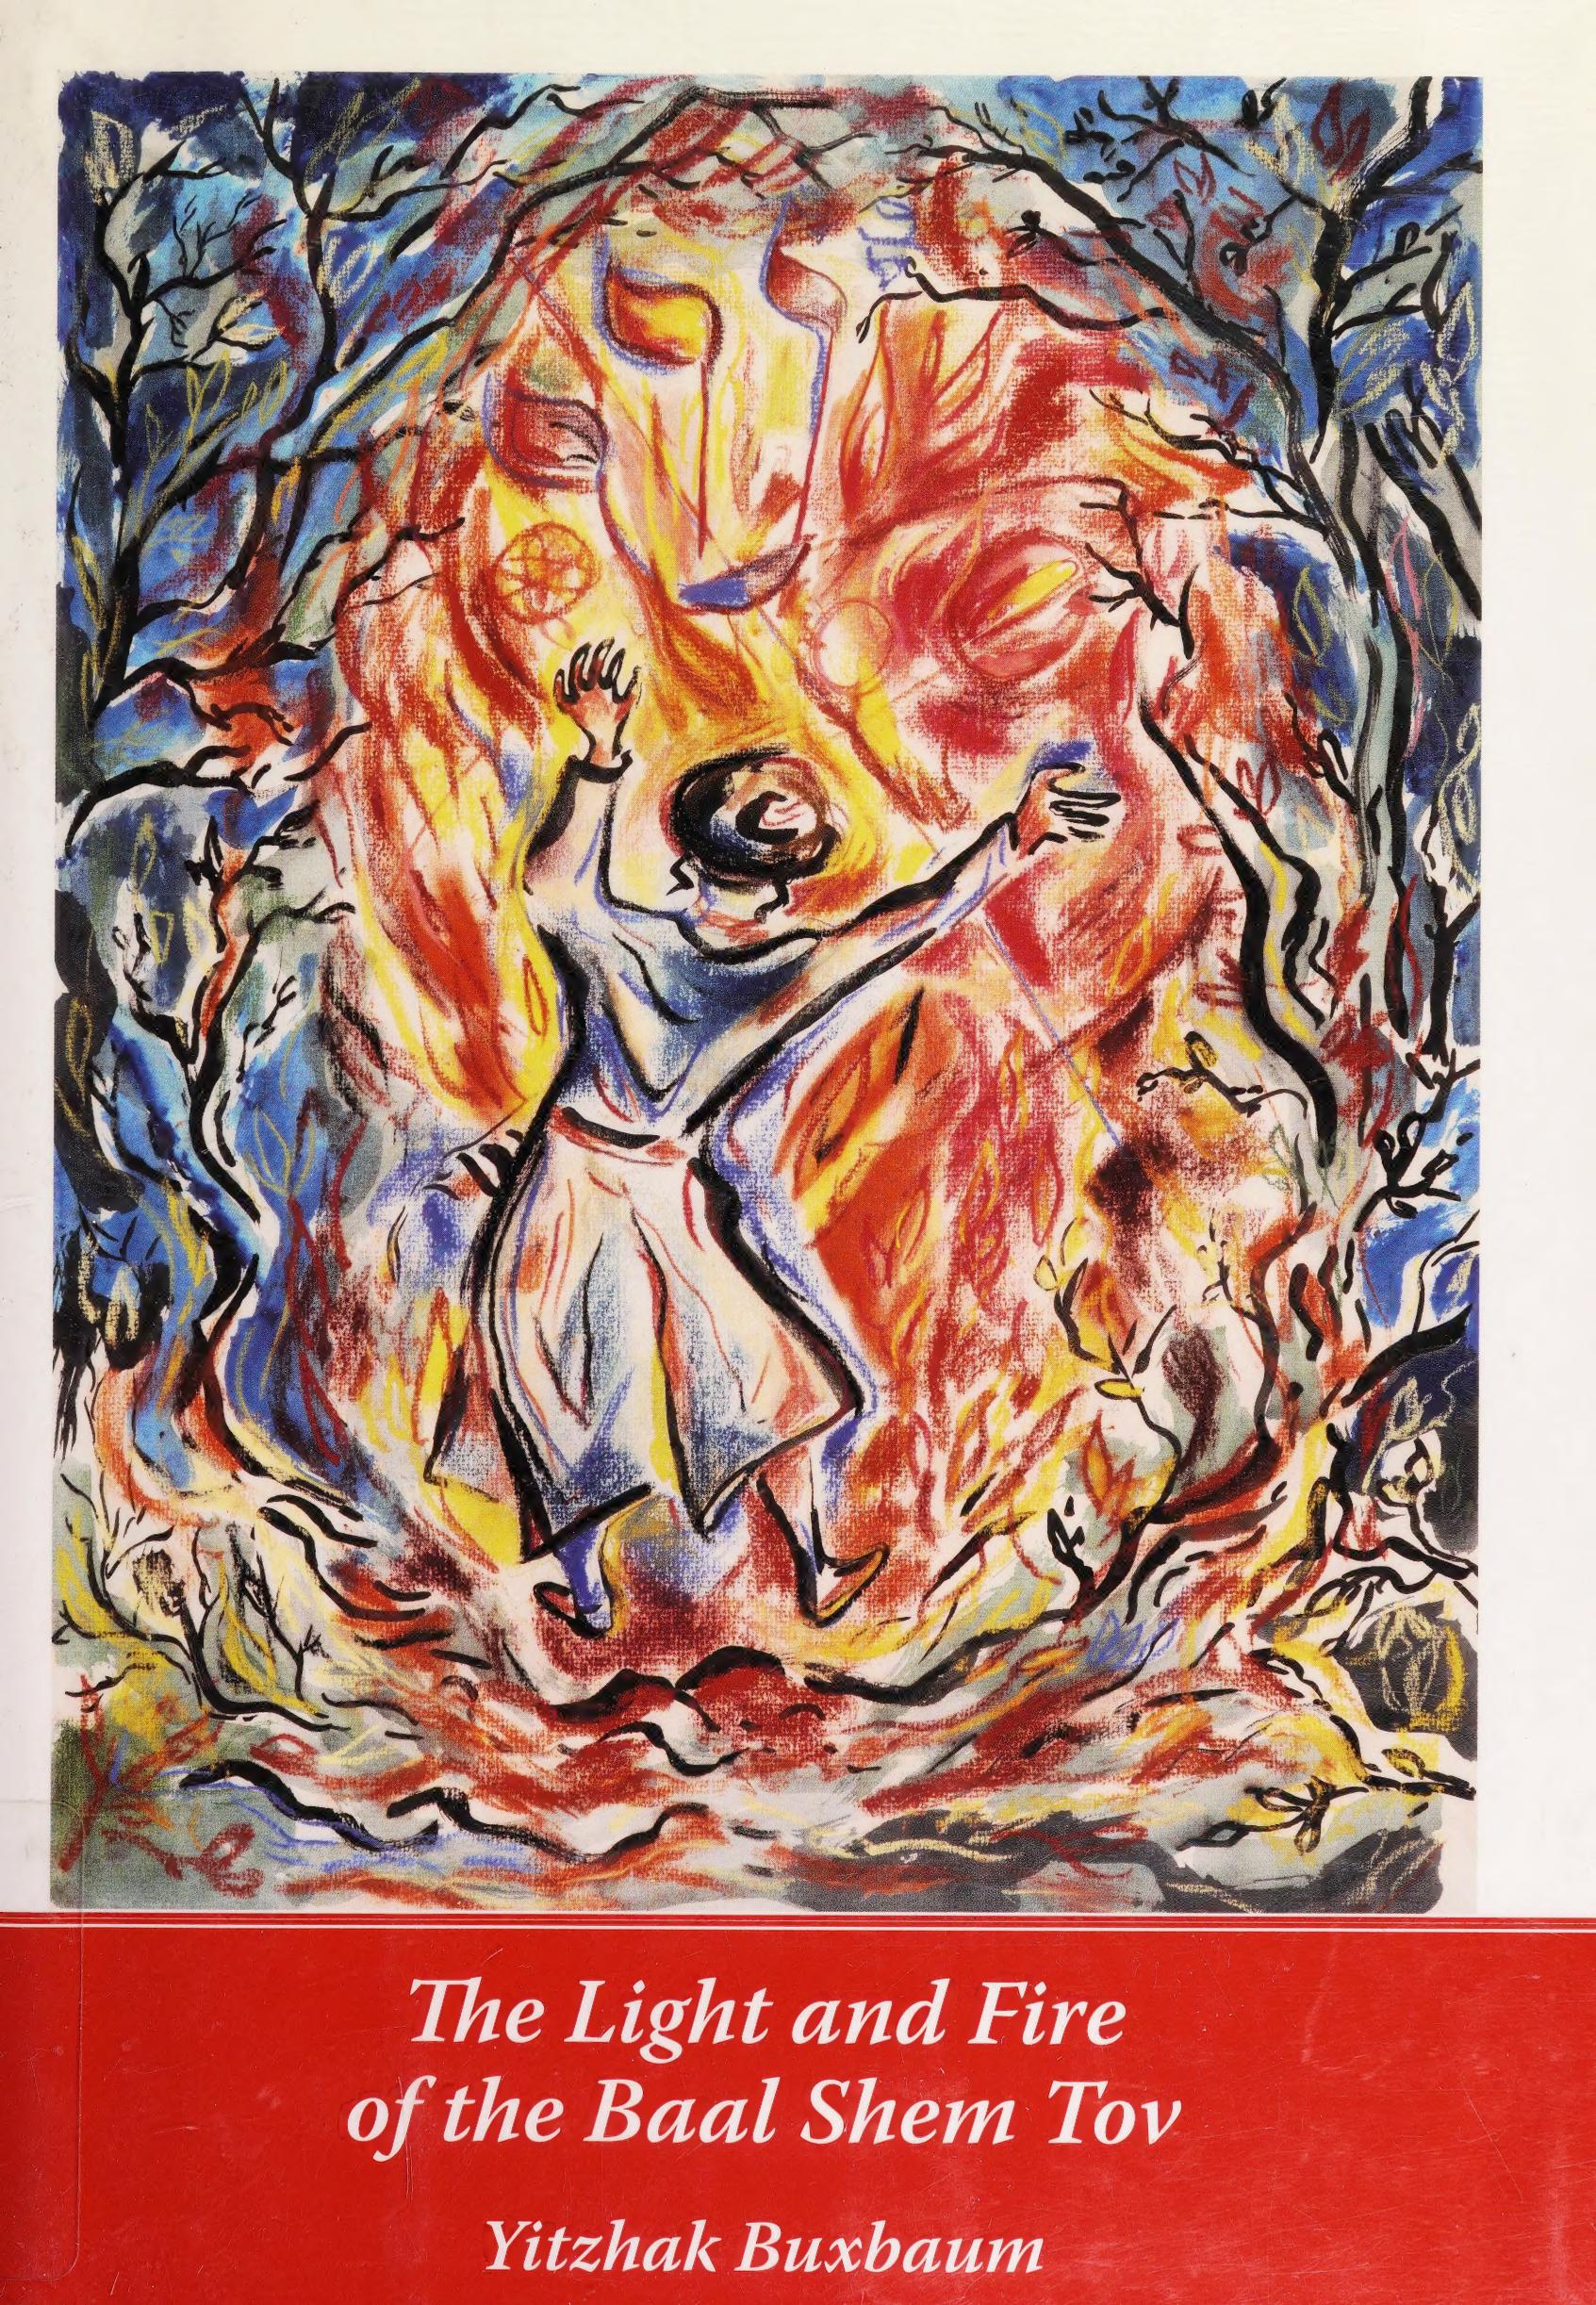 The Light and Fire of the Baal Shem Tov by Yitzhak Buxbaum